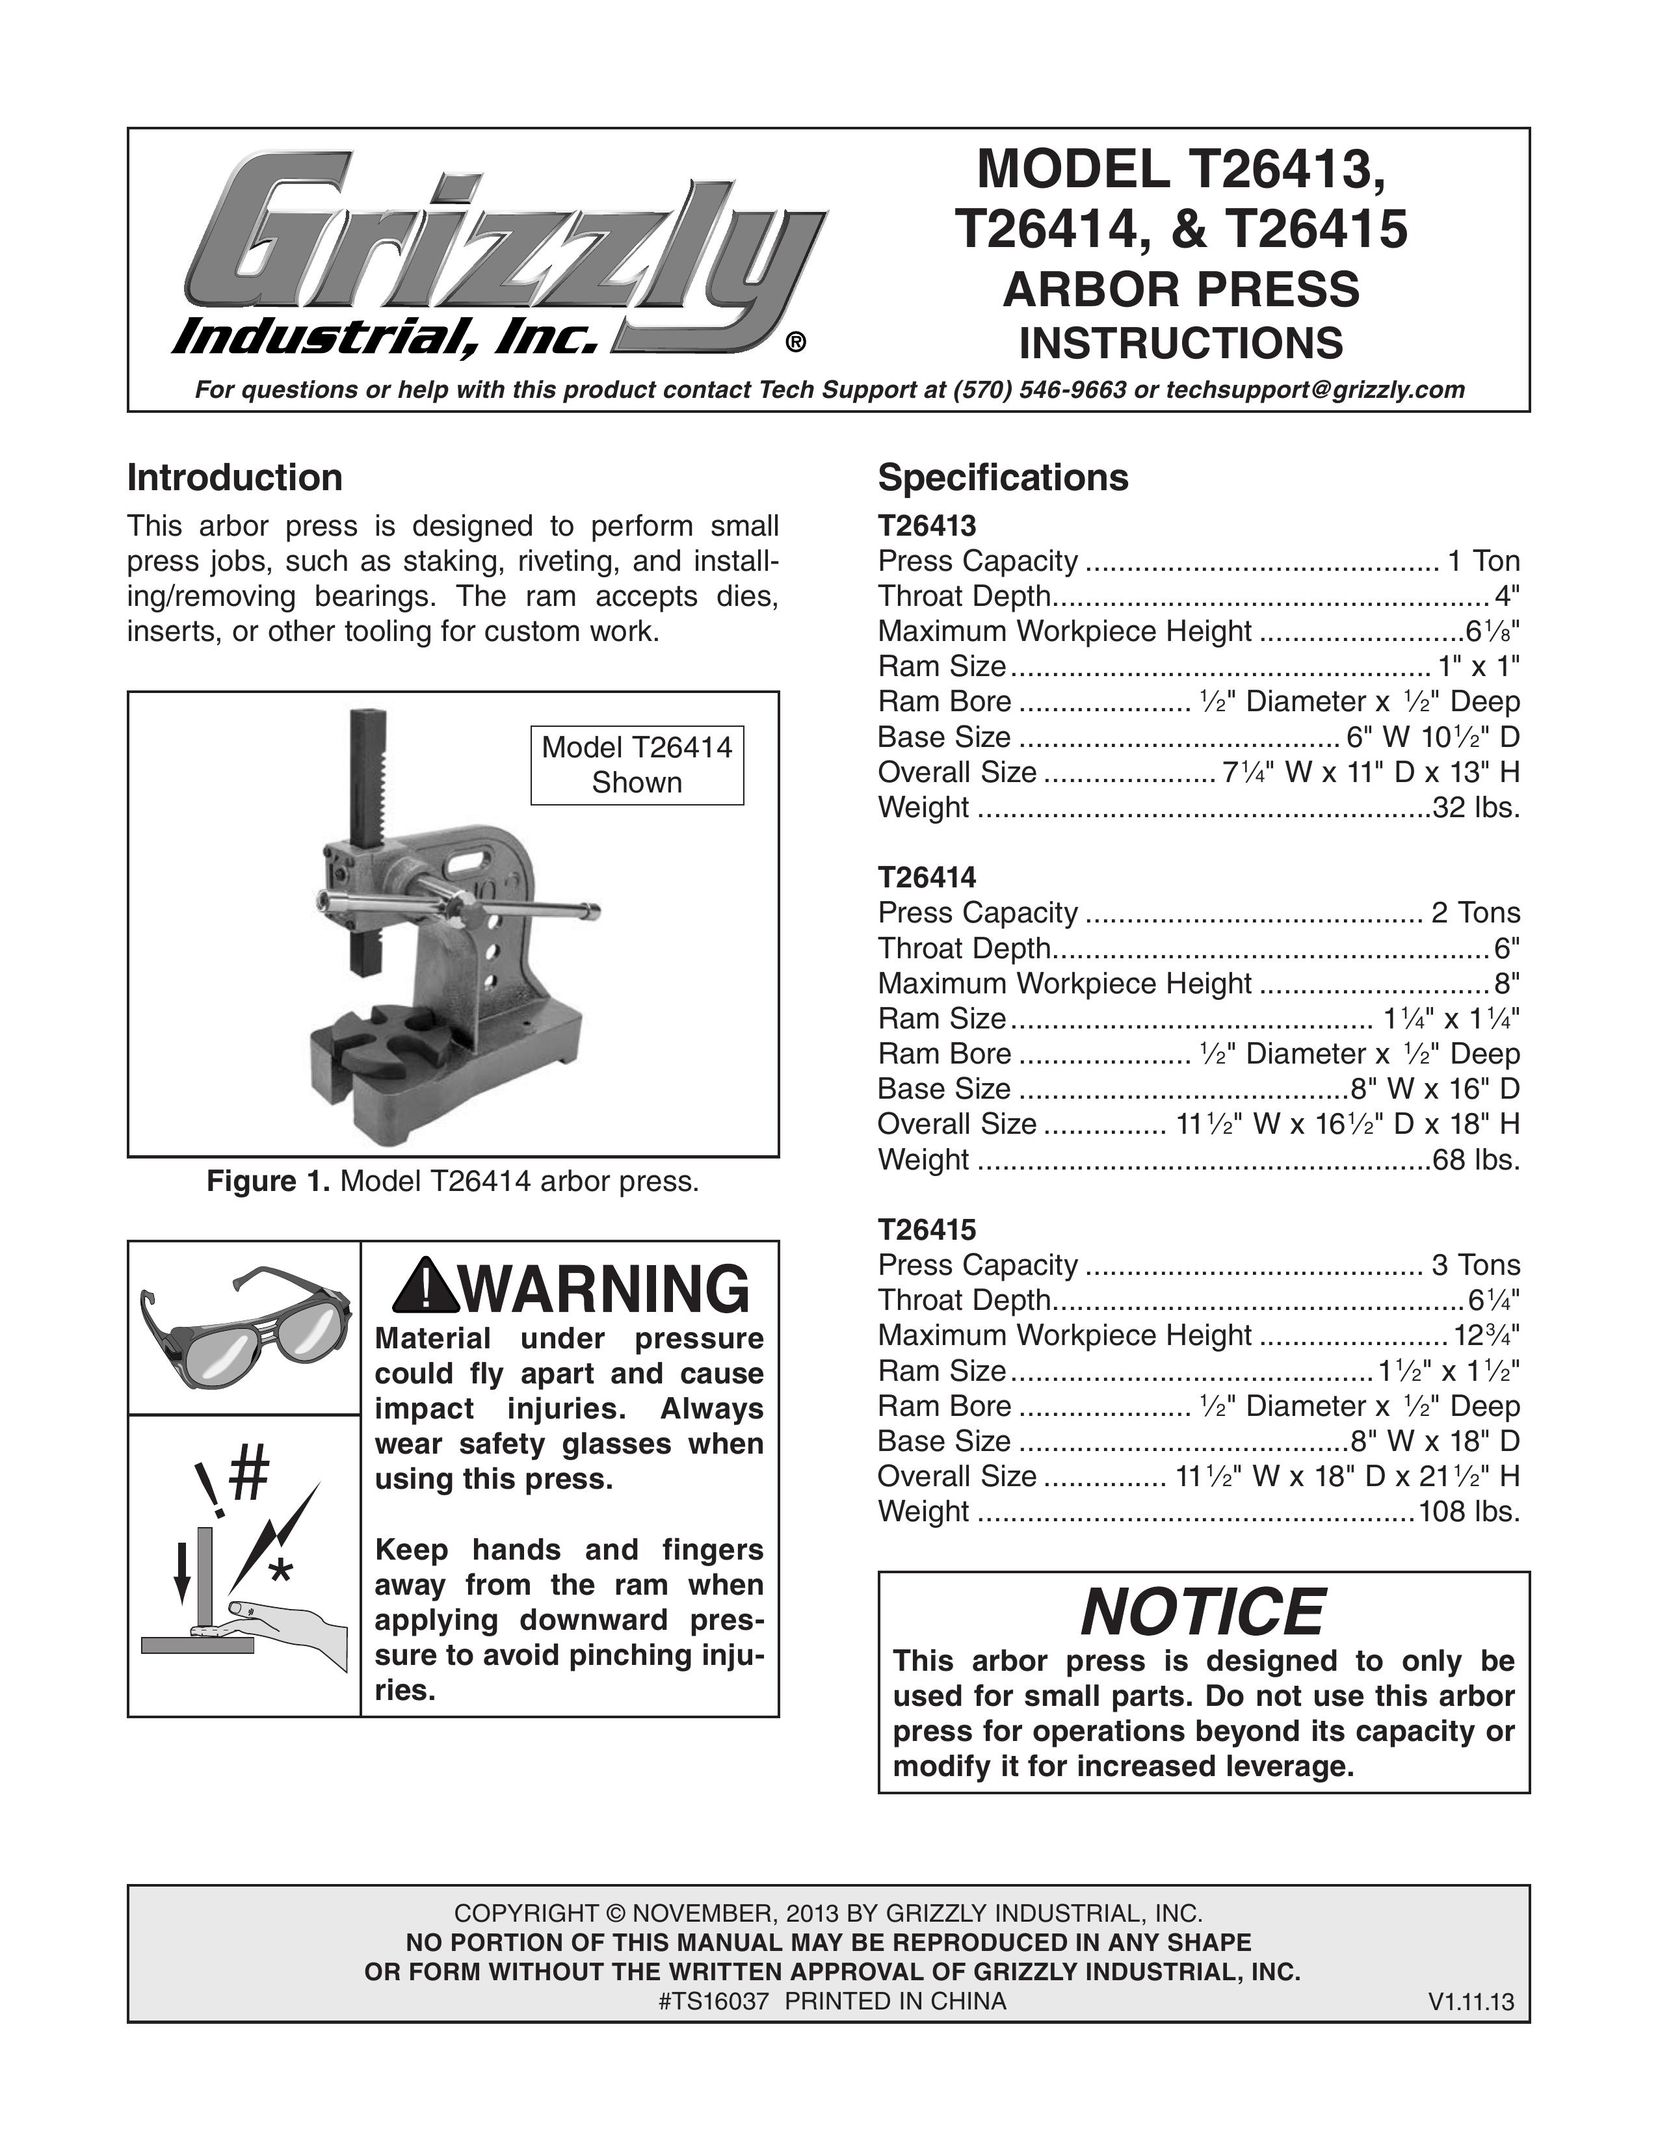 Grizzly T26414 Doll User Manual